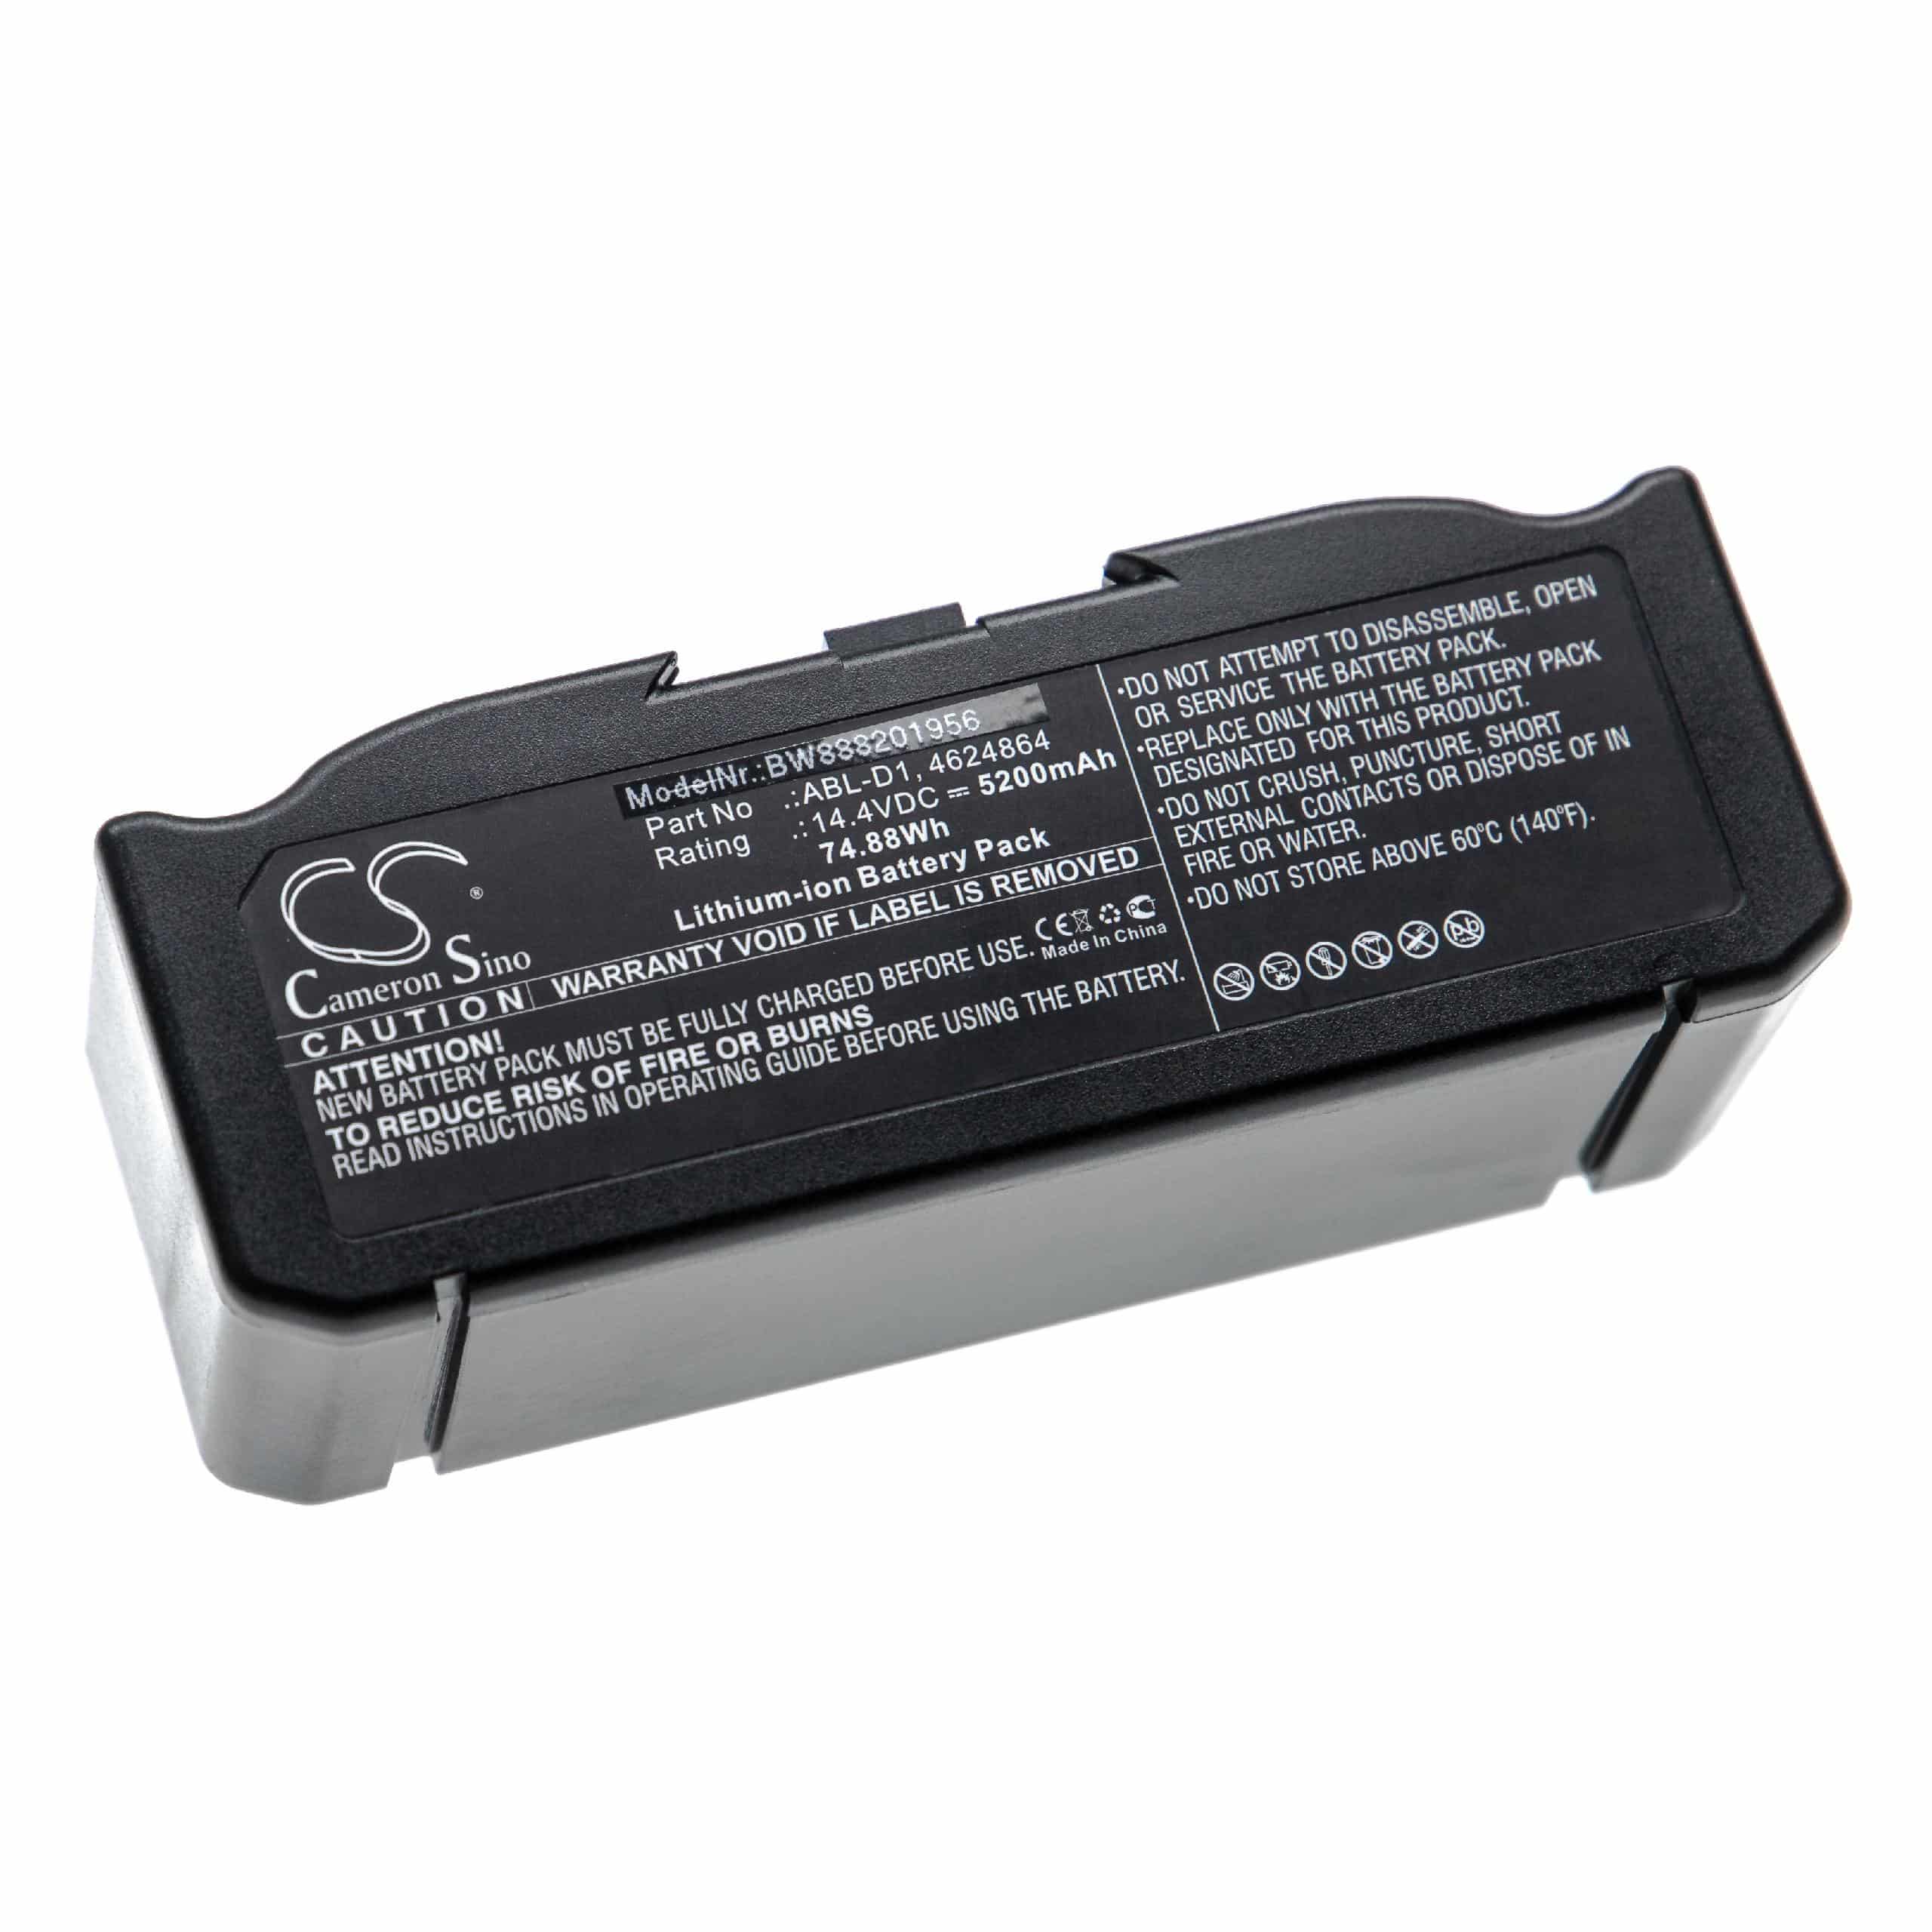 Battery Replacement for iRobot ABL-D2, ABL-D1, 4624864 for - 5200mAh, 14.4V, Li-Ion